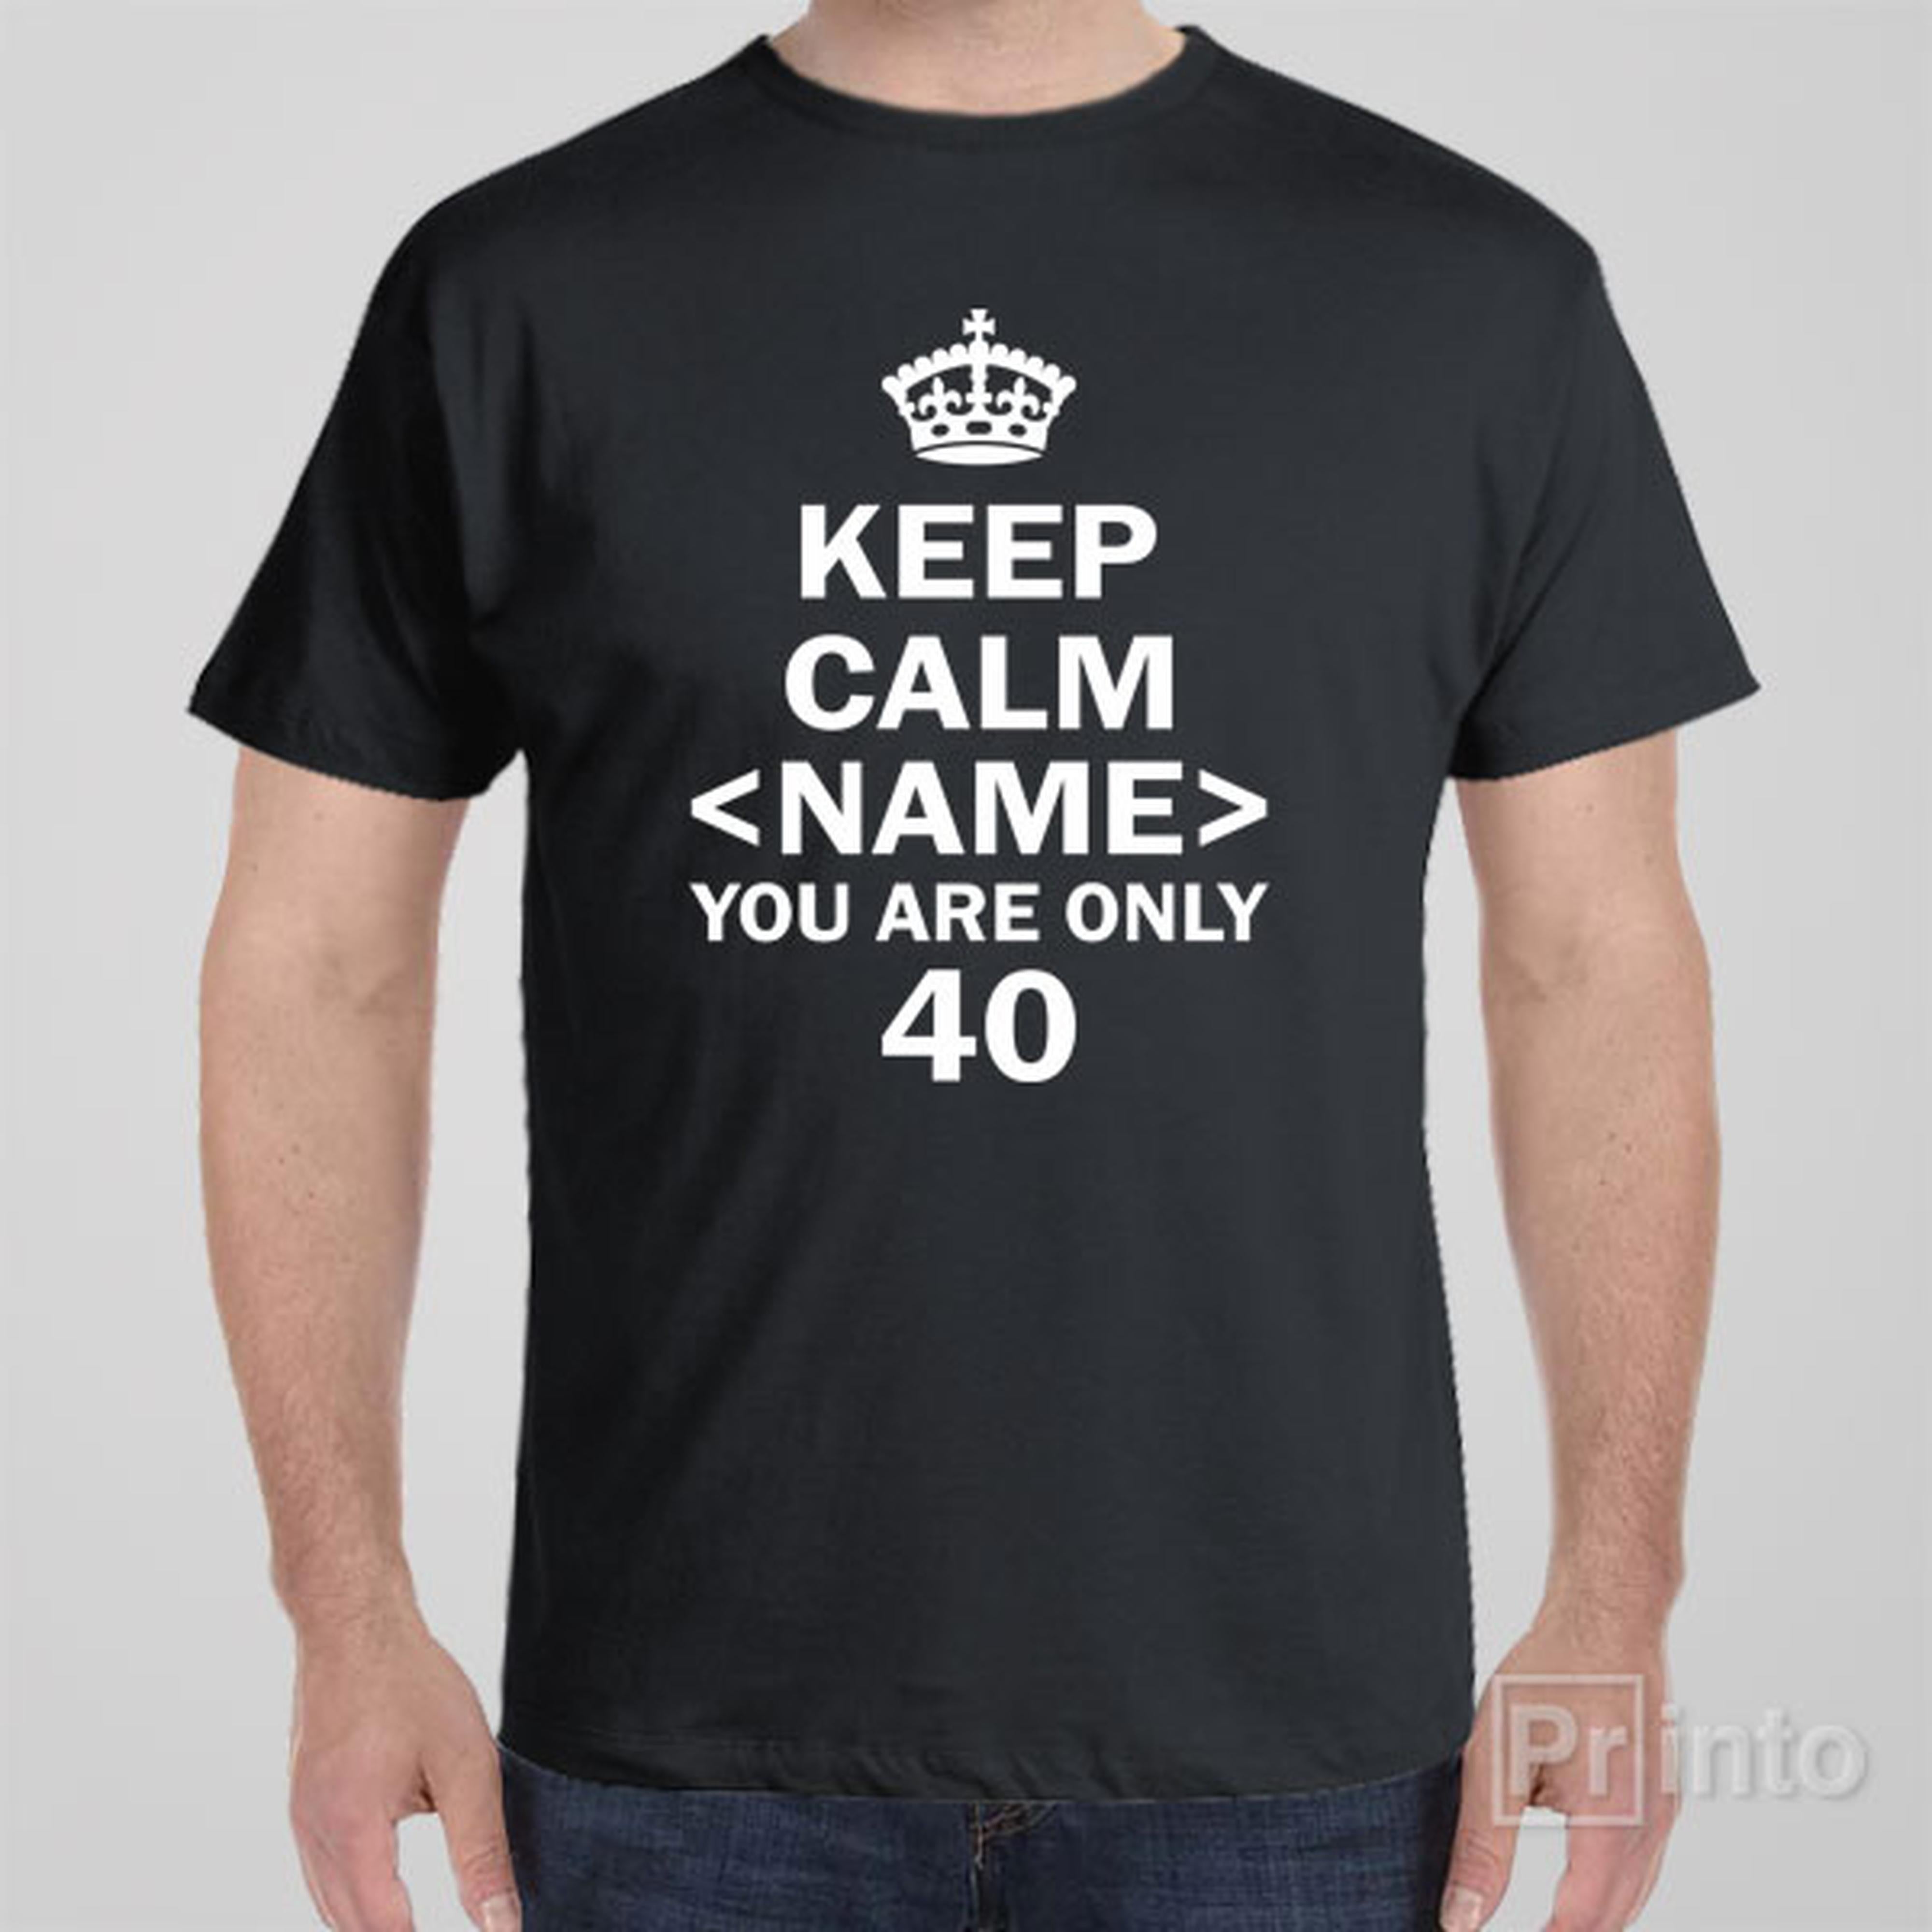 keep-calm-you-are-only-40-t-shirt